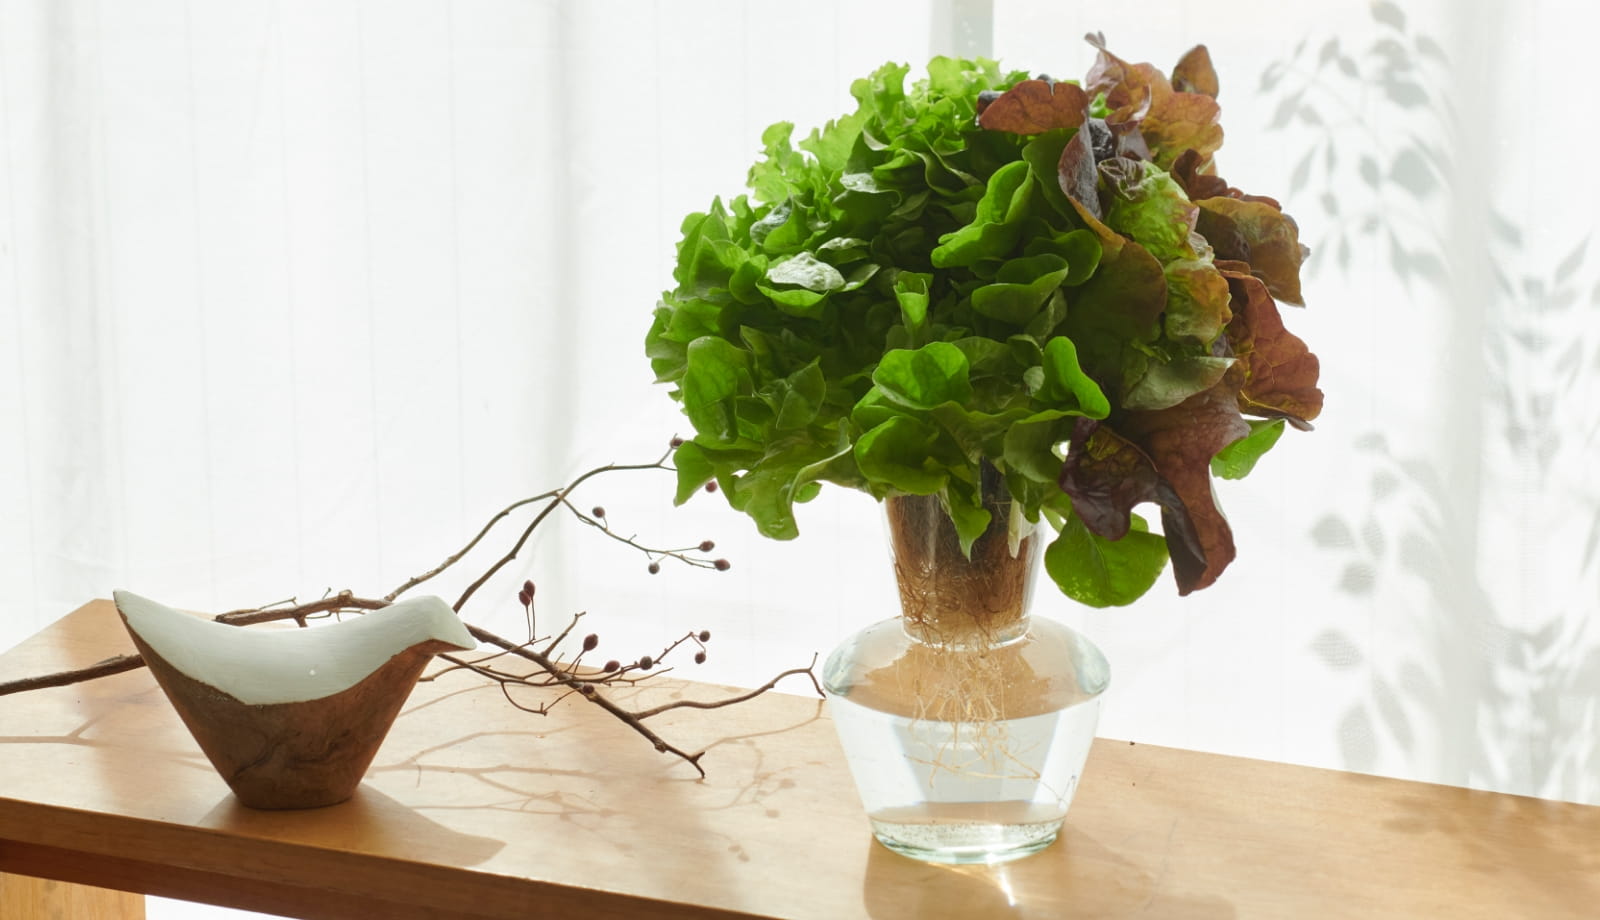 Just put them in a glass of water and turn your kitchen into a vegetable garden.<br>You can have a fresh salad in no time!